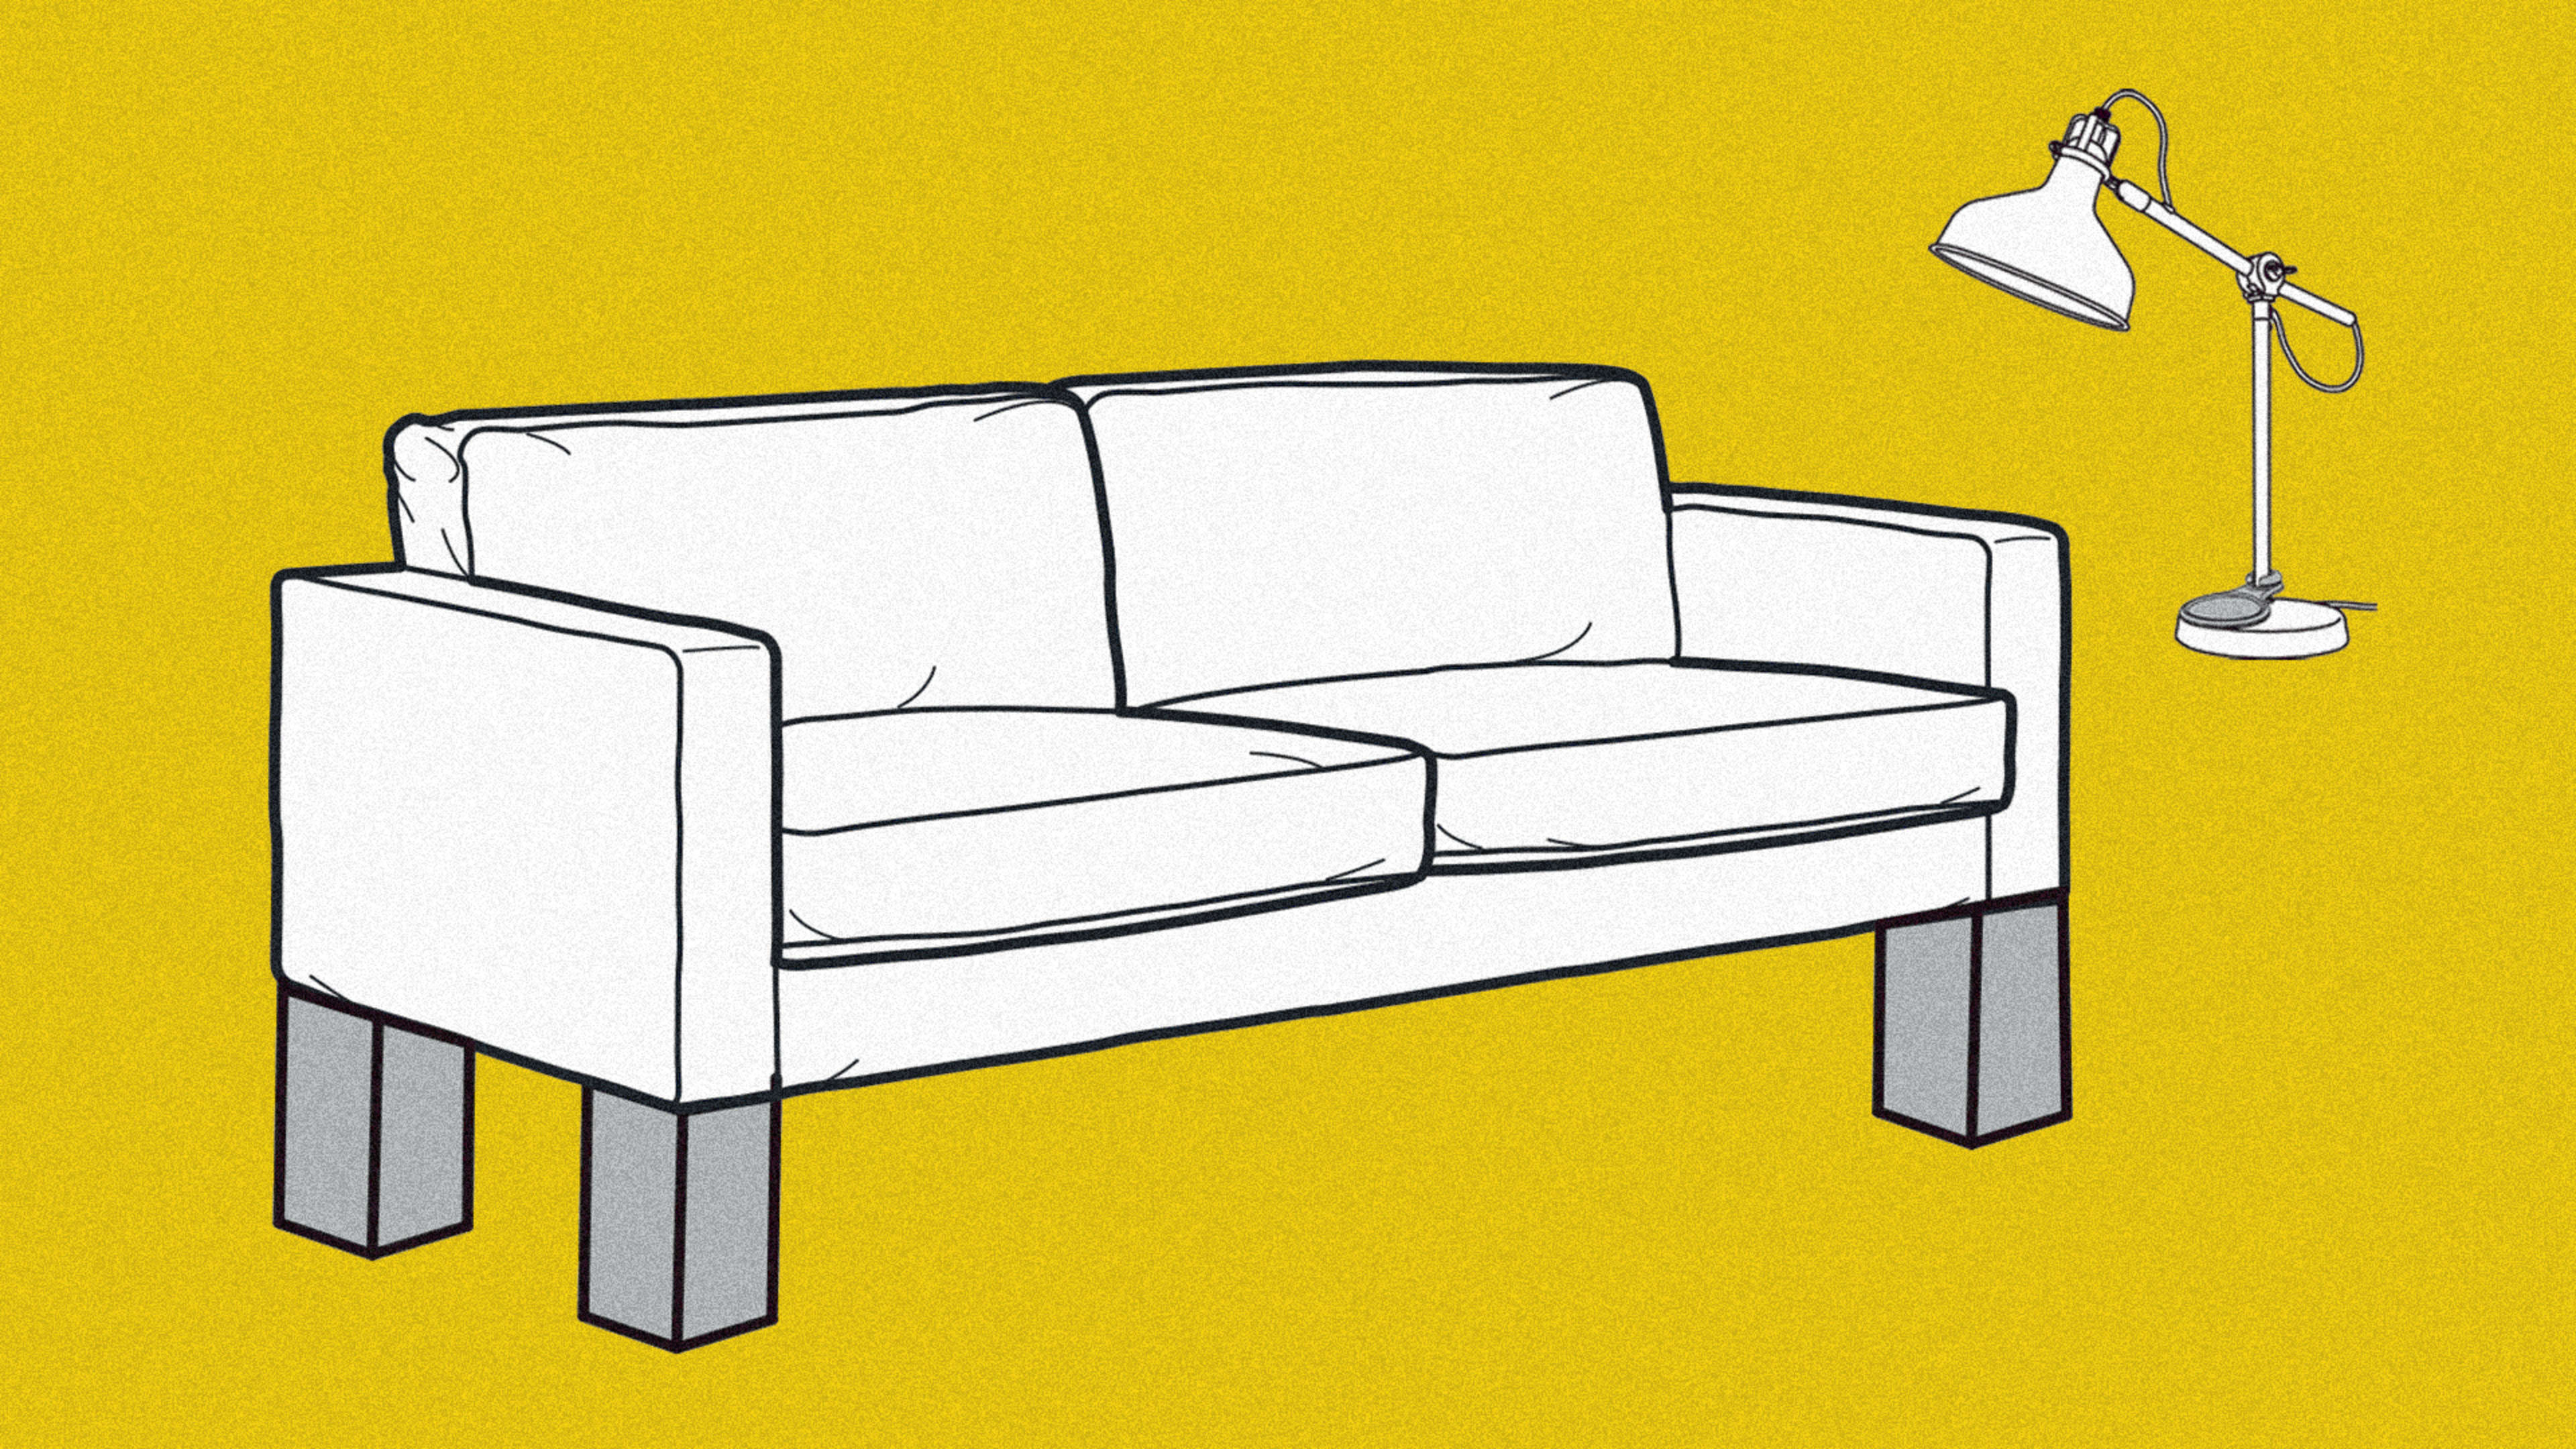 Ikea is hacking its own furniture for people with disabilities